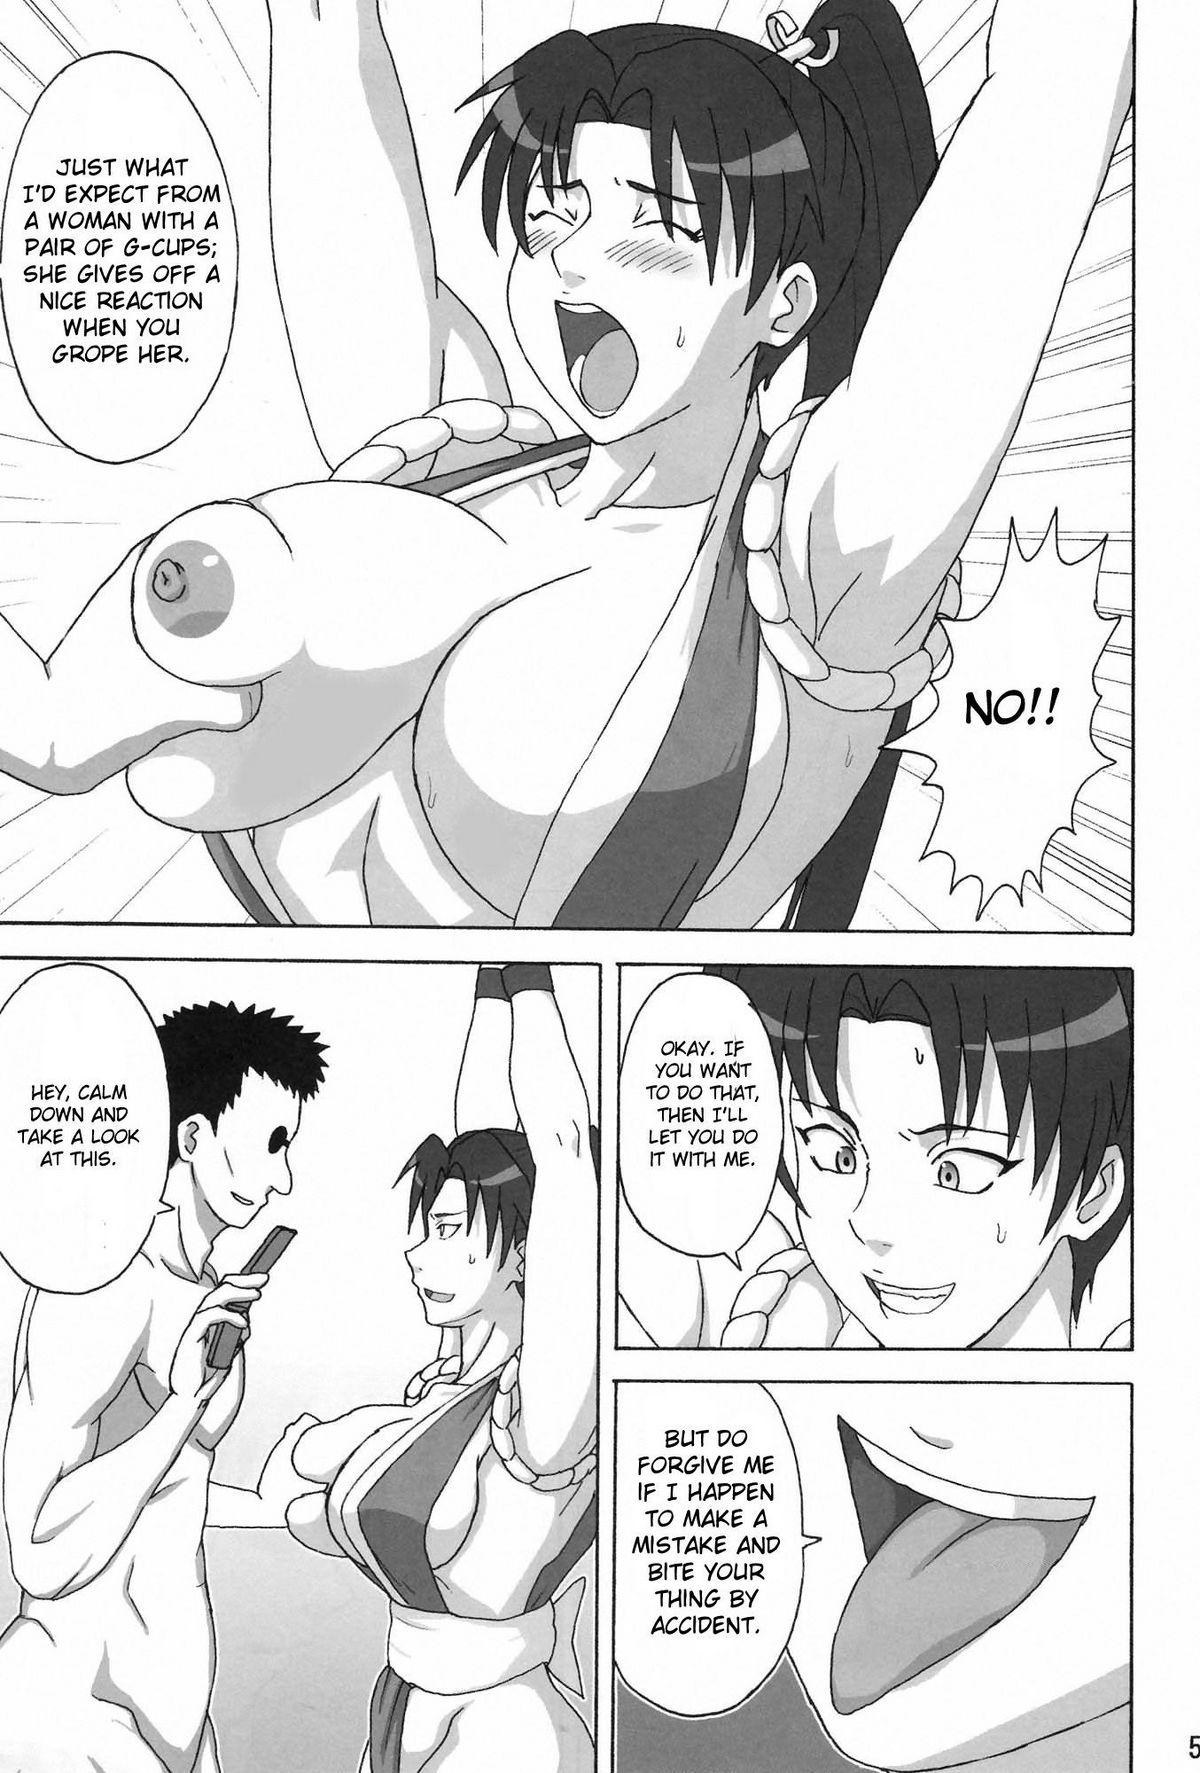 Kiss Mai x 3 - King of fighters Fatal fury Vagina - Page 6